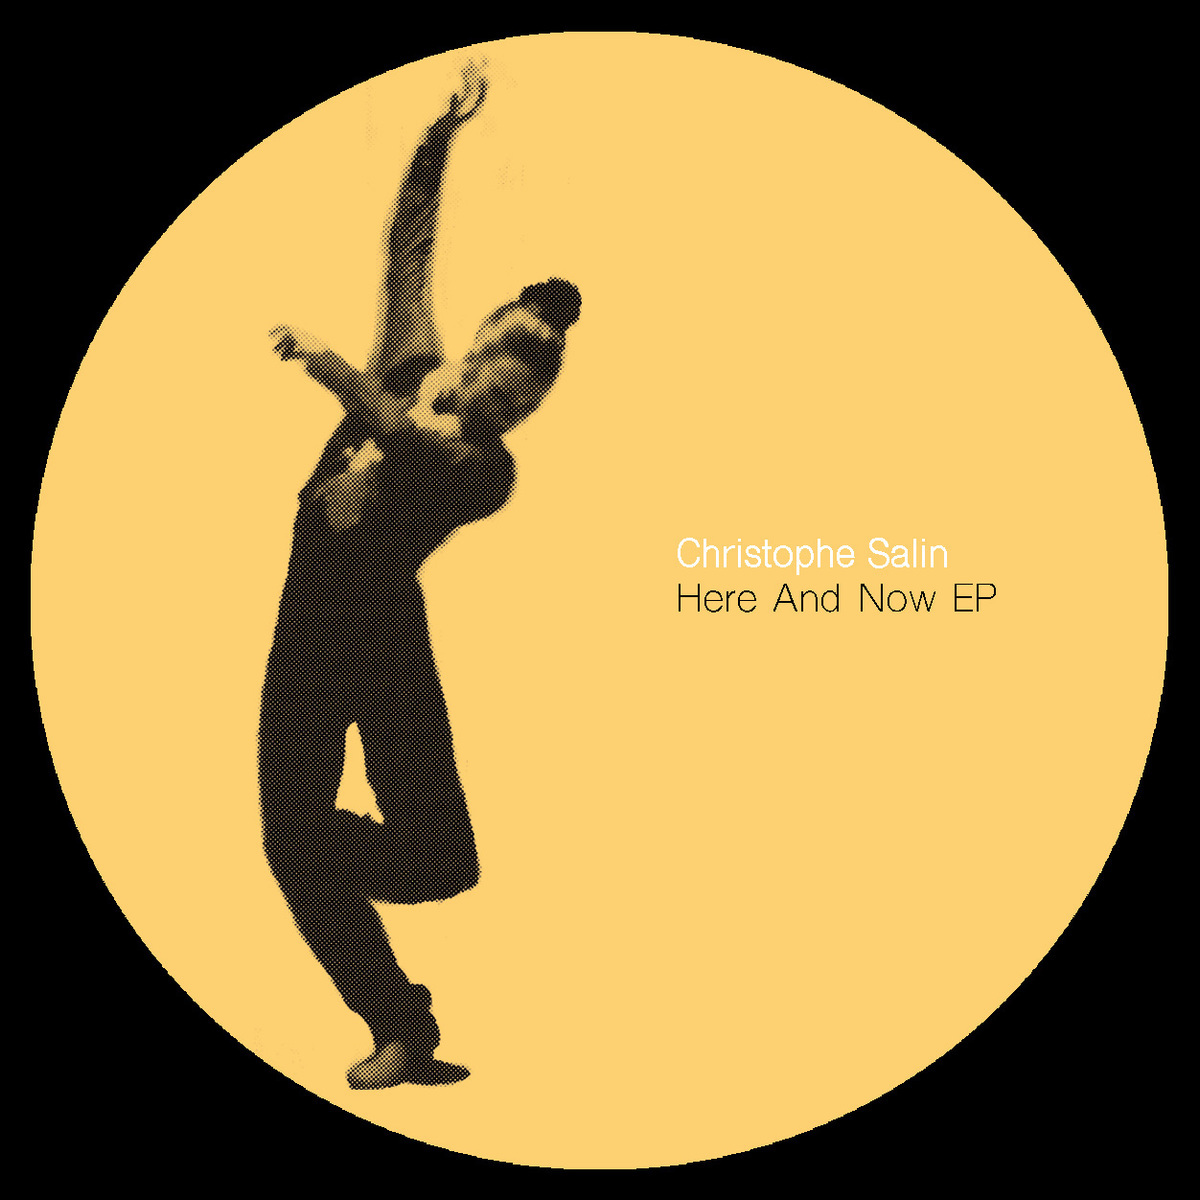 Christophe Salin - Here and Now EP / Salin Records